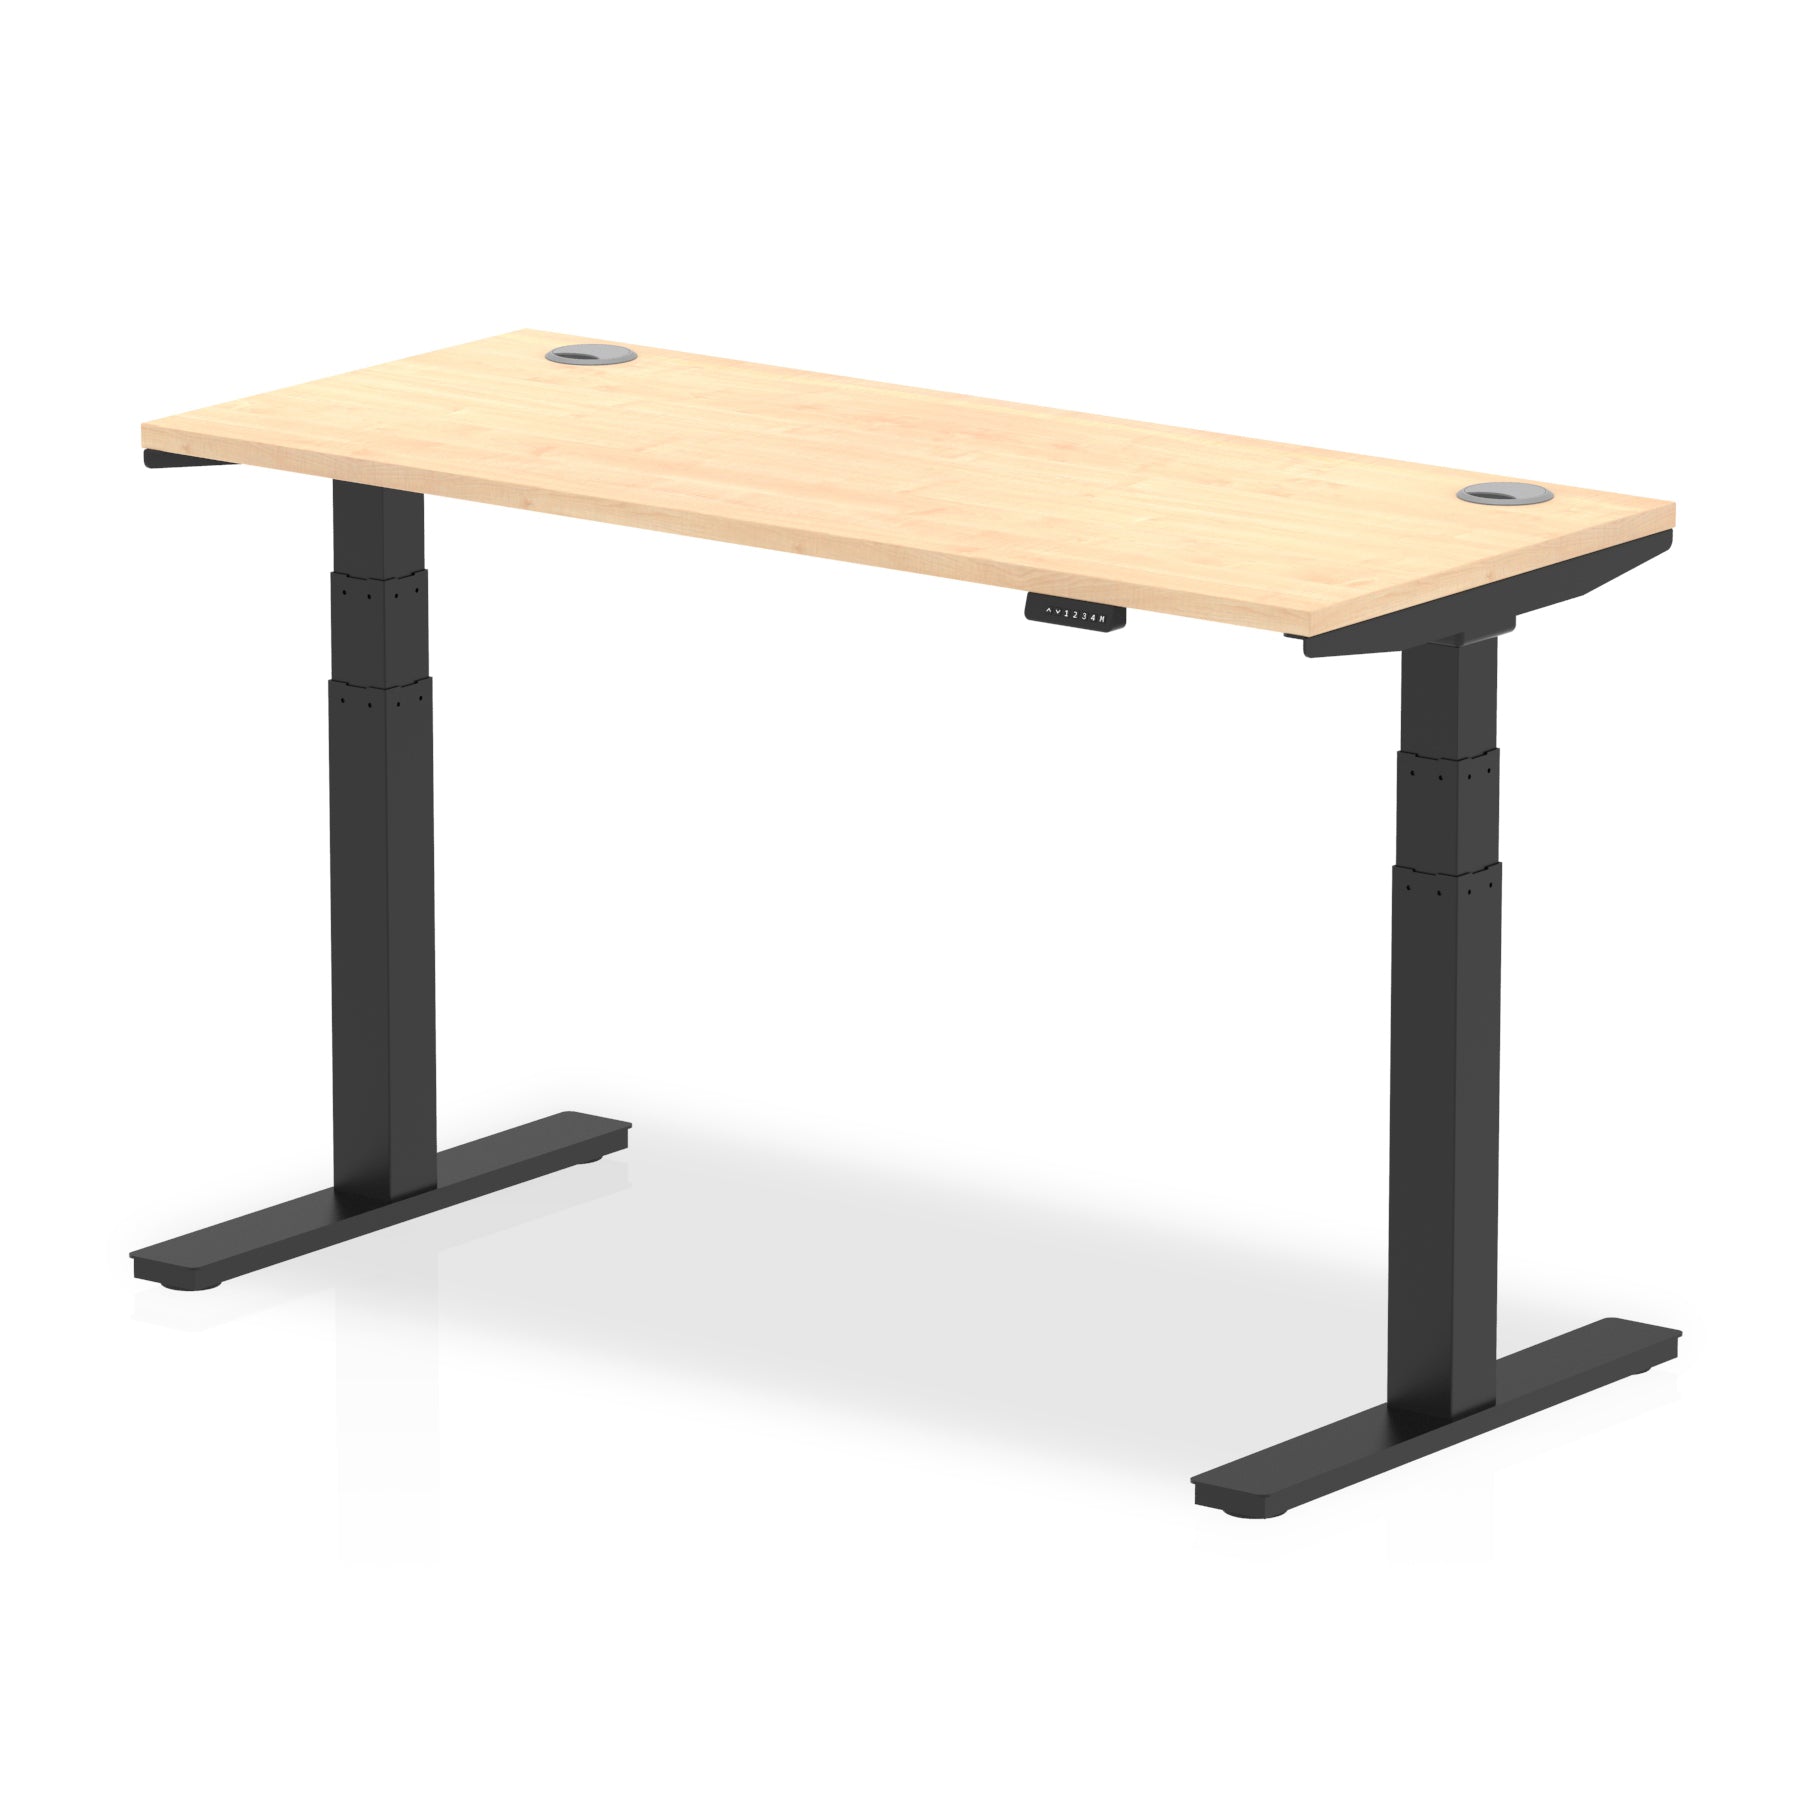 Air Height Adjustable Slimline Desk 1200-1800mm, Cable Ports, MFC Rectangular Top, Black/Silver/White Frame, 5-Year Guarantee